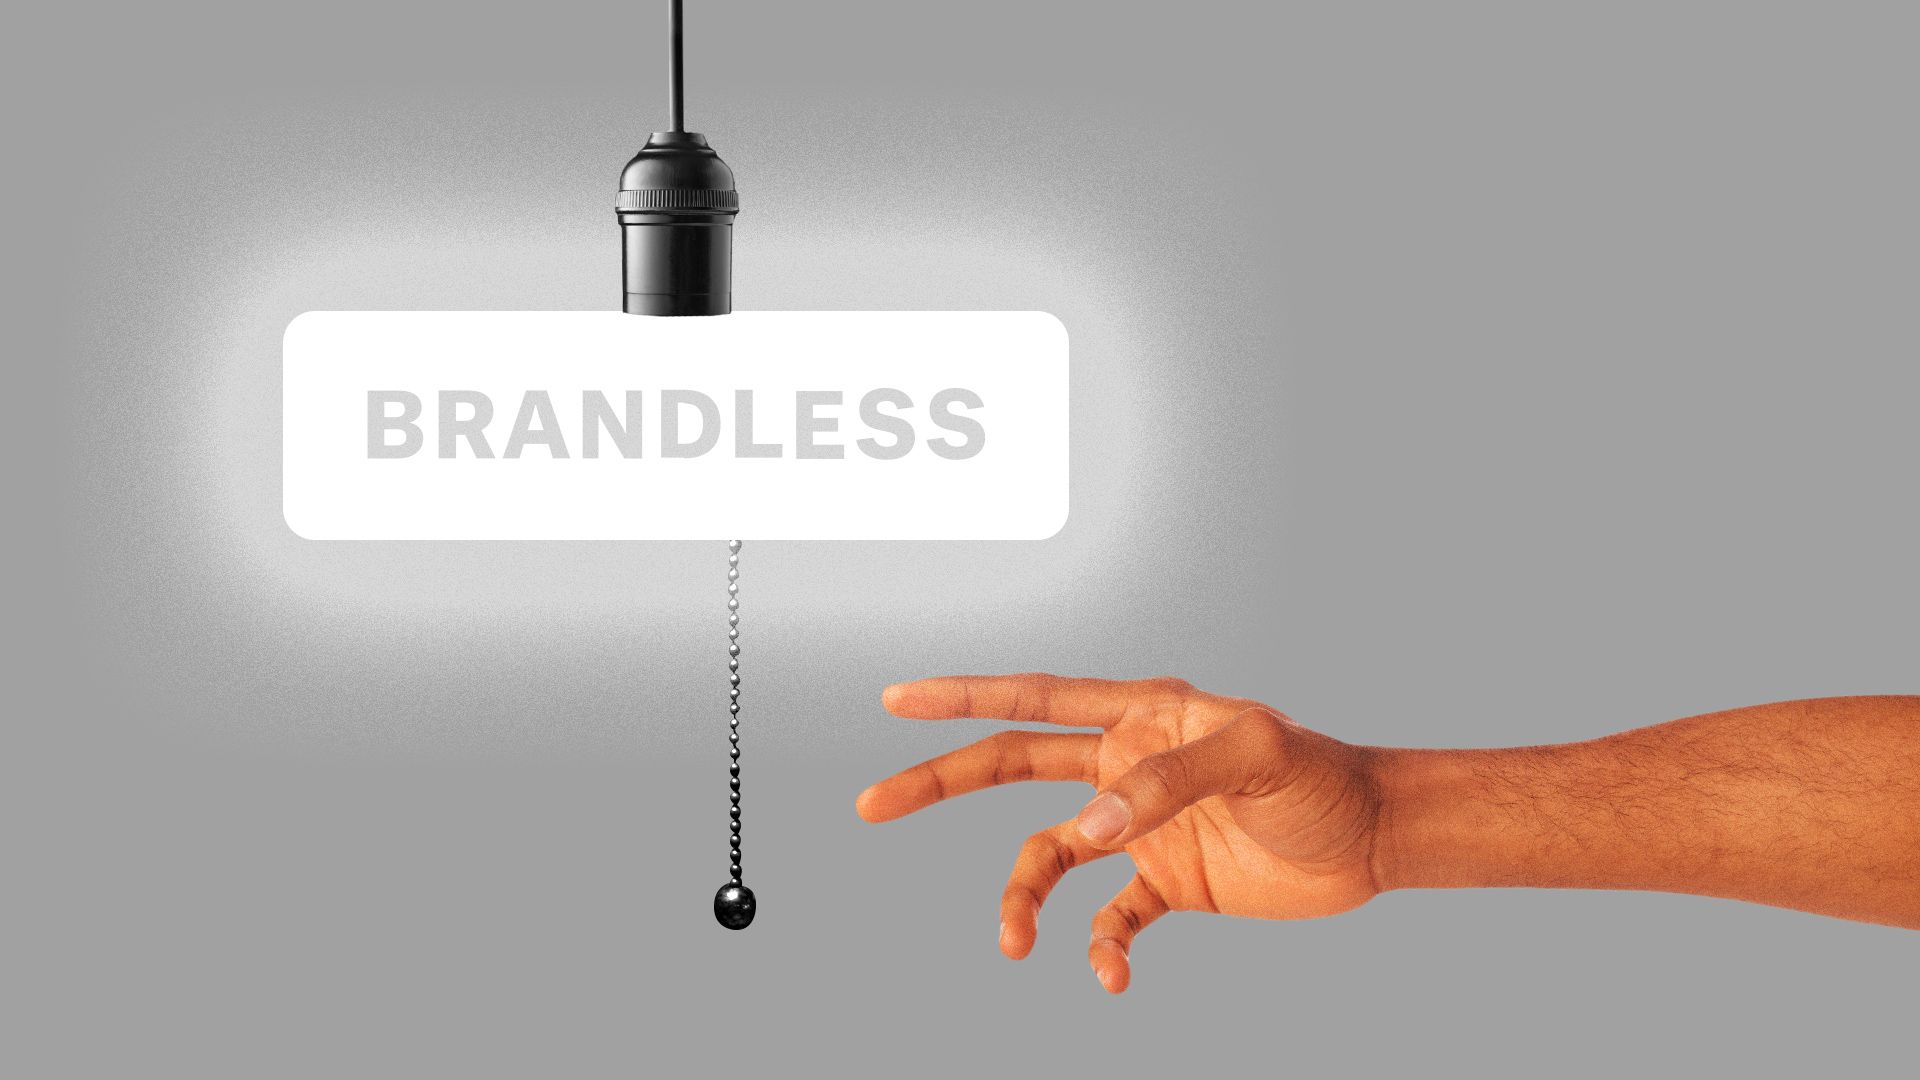 Illustration of the Brandless logo as a lightbulb with a hand reaching out to pull it's chain and turn it off.